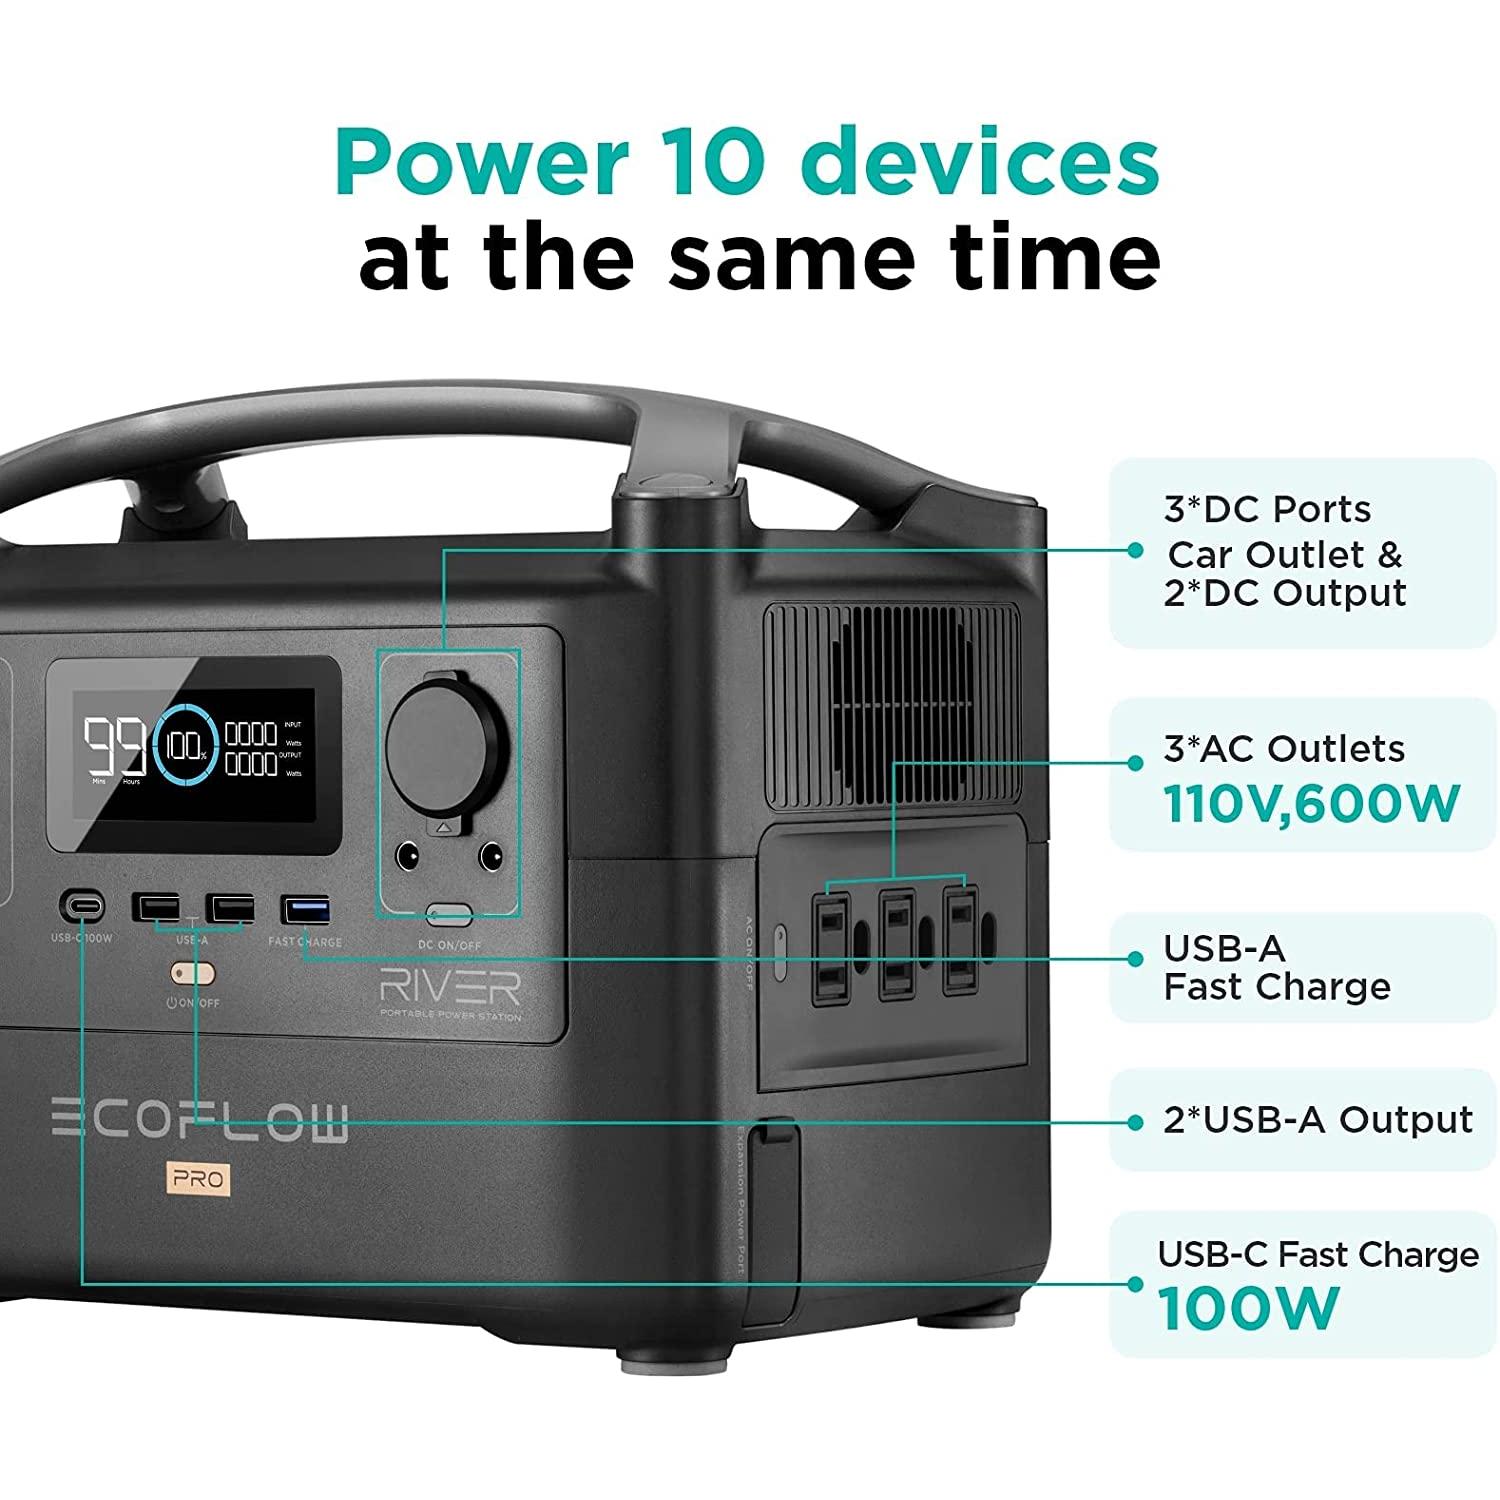 EF ECOFLOW River Pro Portable Power Station 720Wh, Power Multiple Devices, Recharge 0-80% Within 1 Hour, for Camping, RV, Outdoors, Off-Grid